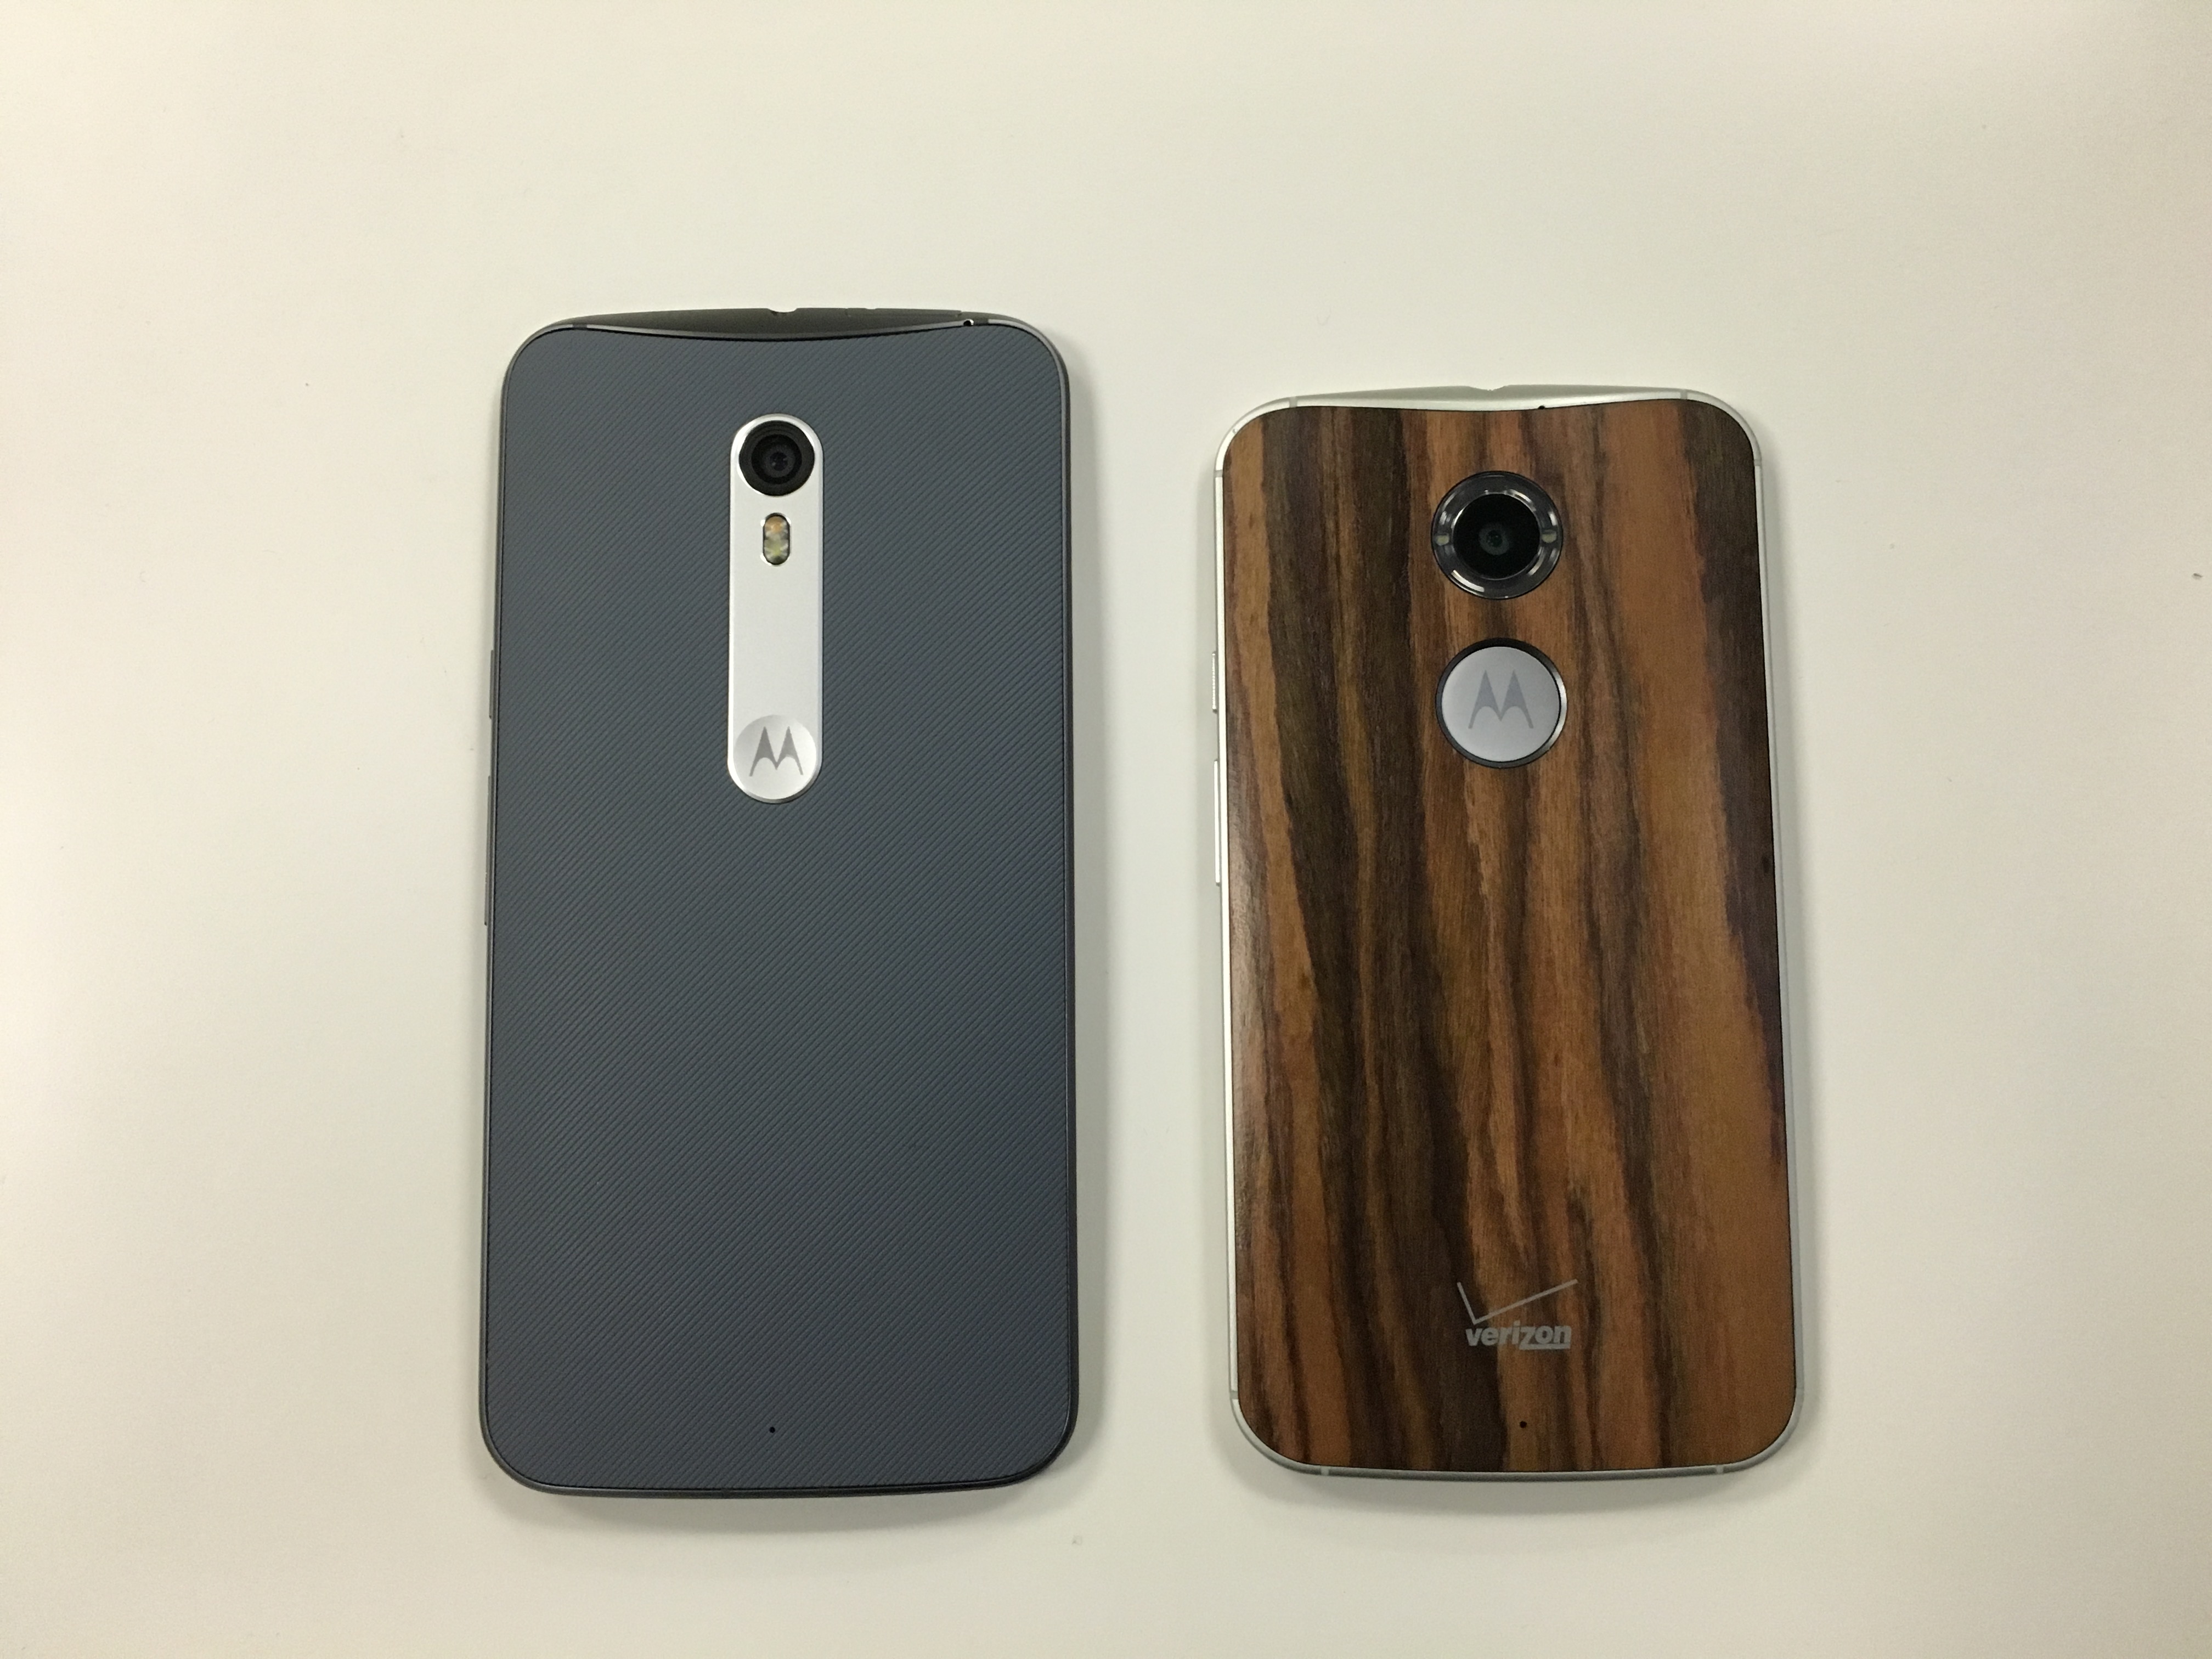 The back of the Moto X Pure Edition, left, next to the back of the Moto X (2nd Gen).